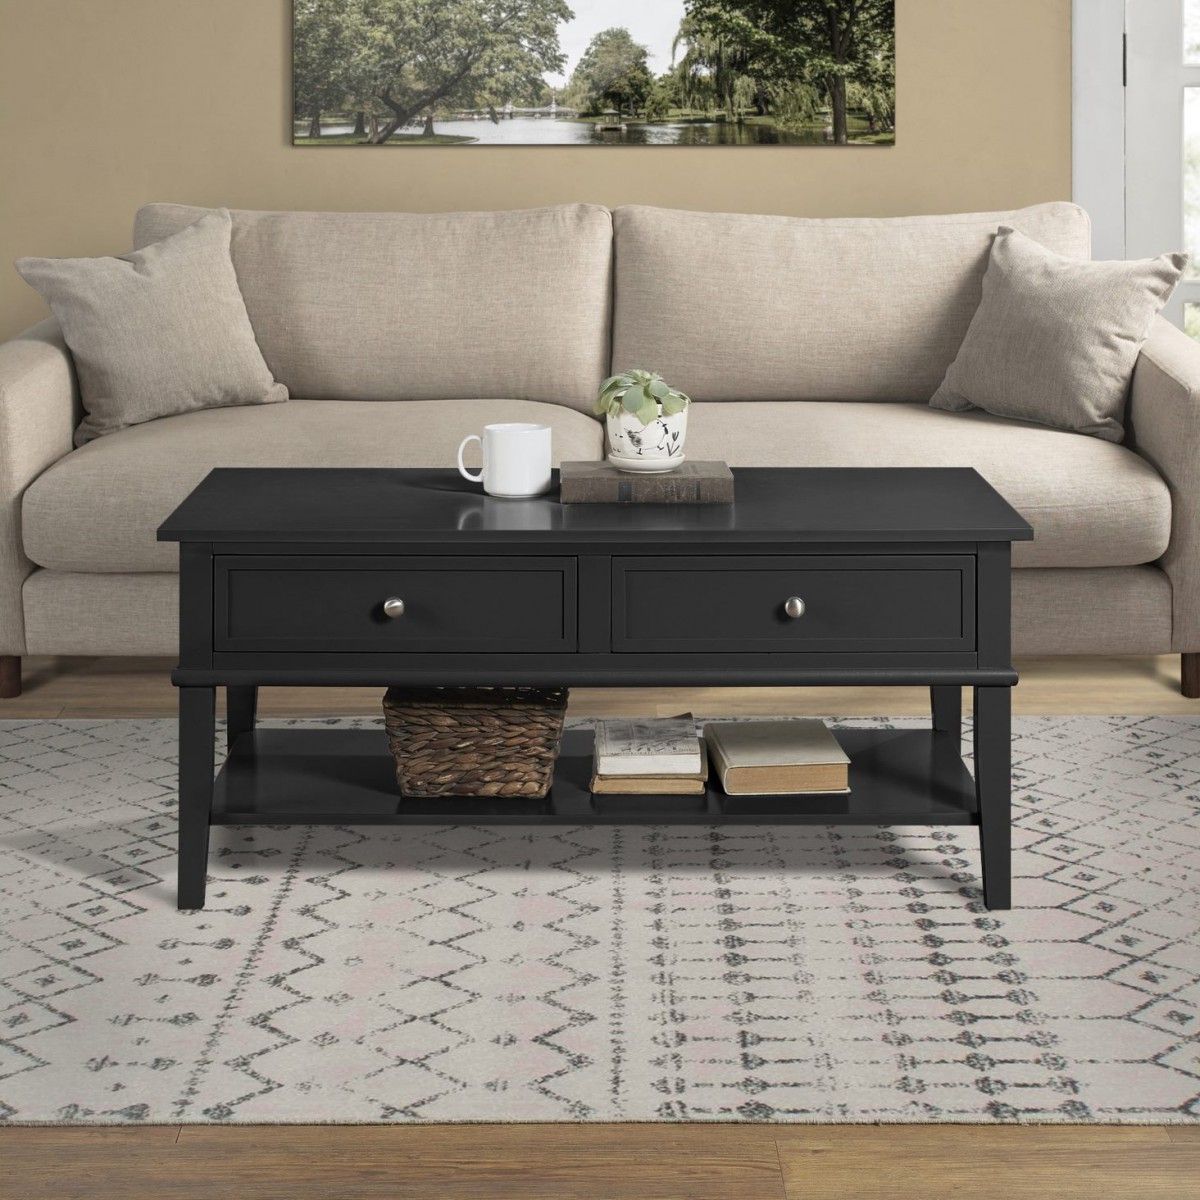 Well Liked Gray And Black Coffee Tables With Regard To Dorel Franklin Coffee Table Black Grey Or White Painted Wood (View 5 of 20)